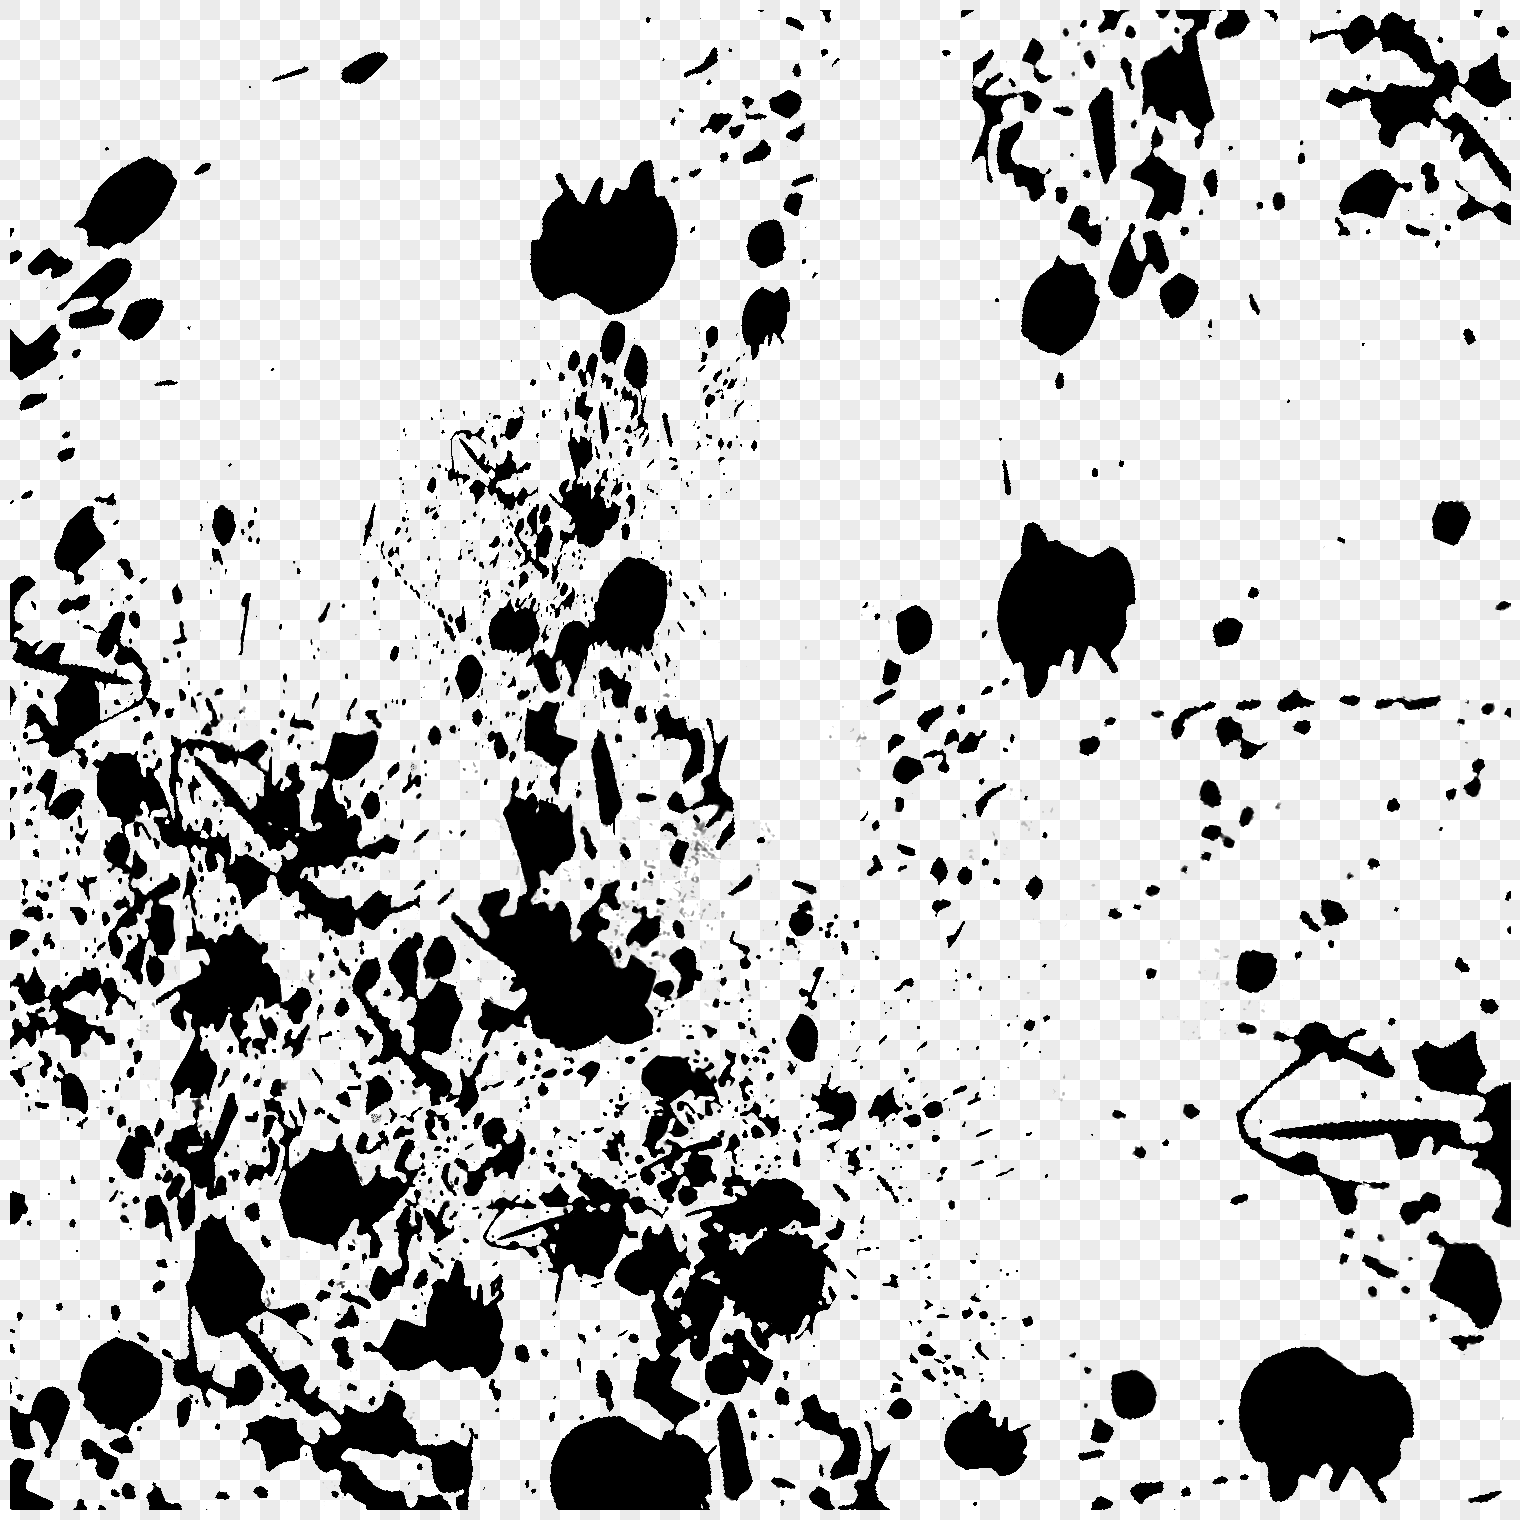 Black brush strokes brush elements png image_picture free download ...